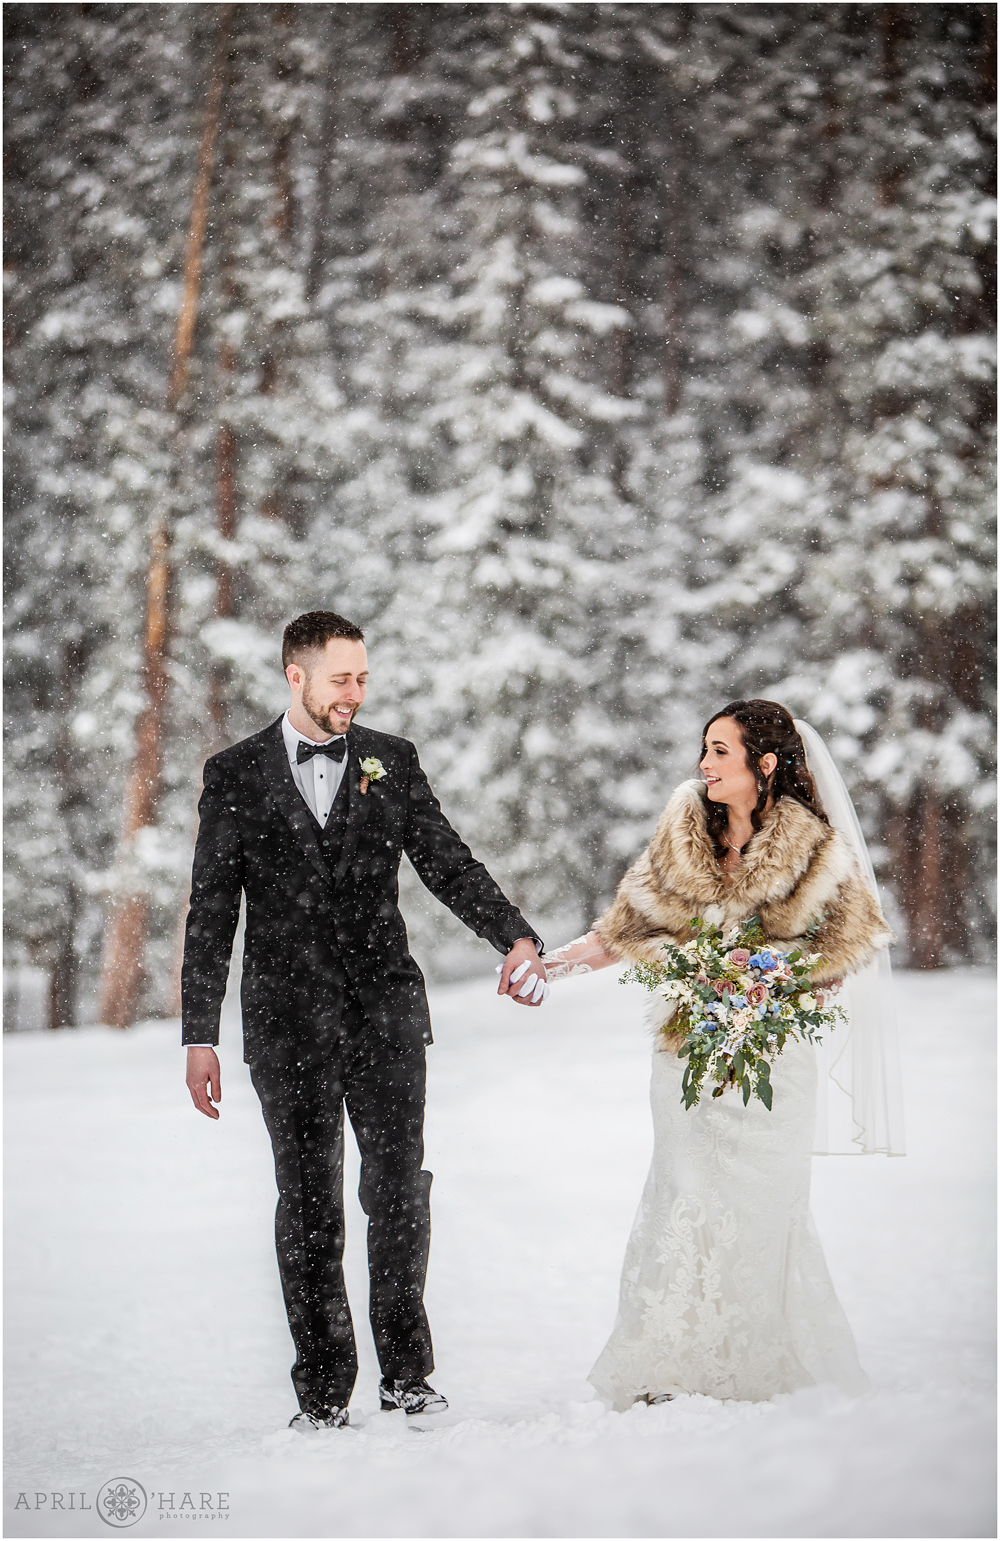 Couple walks hand in hand through the snow at their Winter wedding at Keystone Resort in Colorado